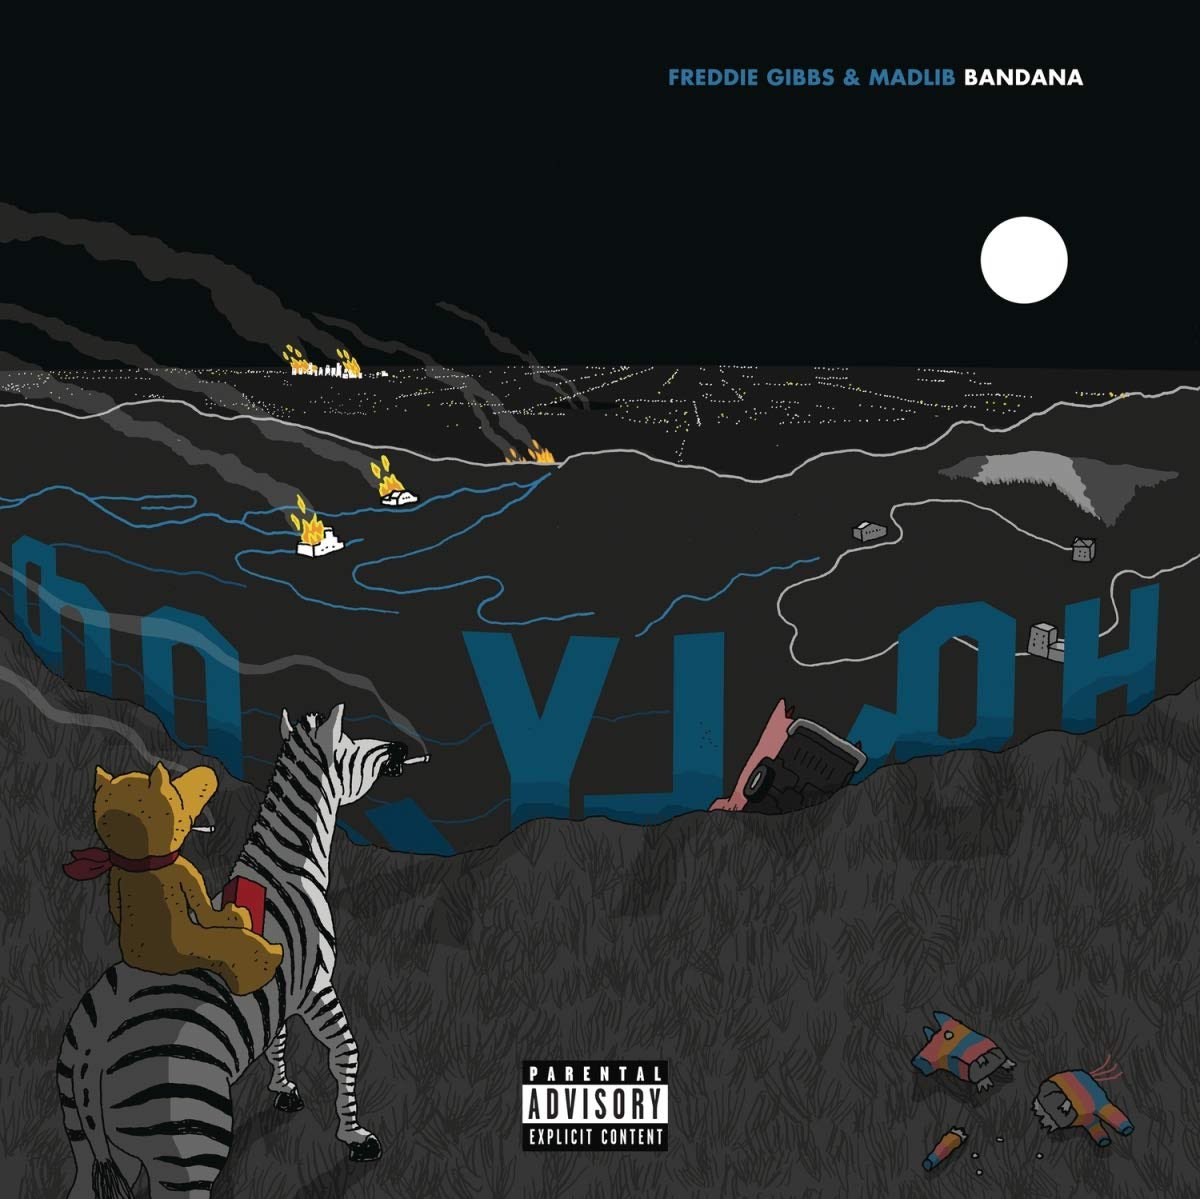 2019: Bandana - Freddie Gibbs & MadlibFreddie Gibbs & Madlib brought the heat yet again on their sophomore collab, with a heavenly beat package that Madlib made ona fucking ipad and arguably Freddie’s best ever flowsFave Tracks: Cataracts, Crime Pays, SituationsHm: Igor